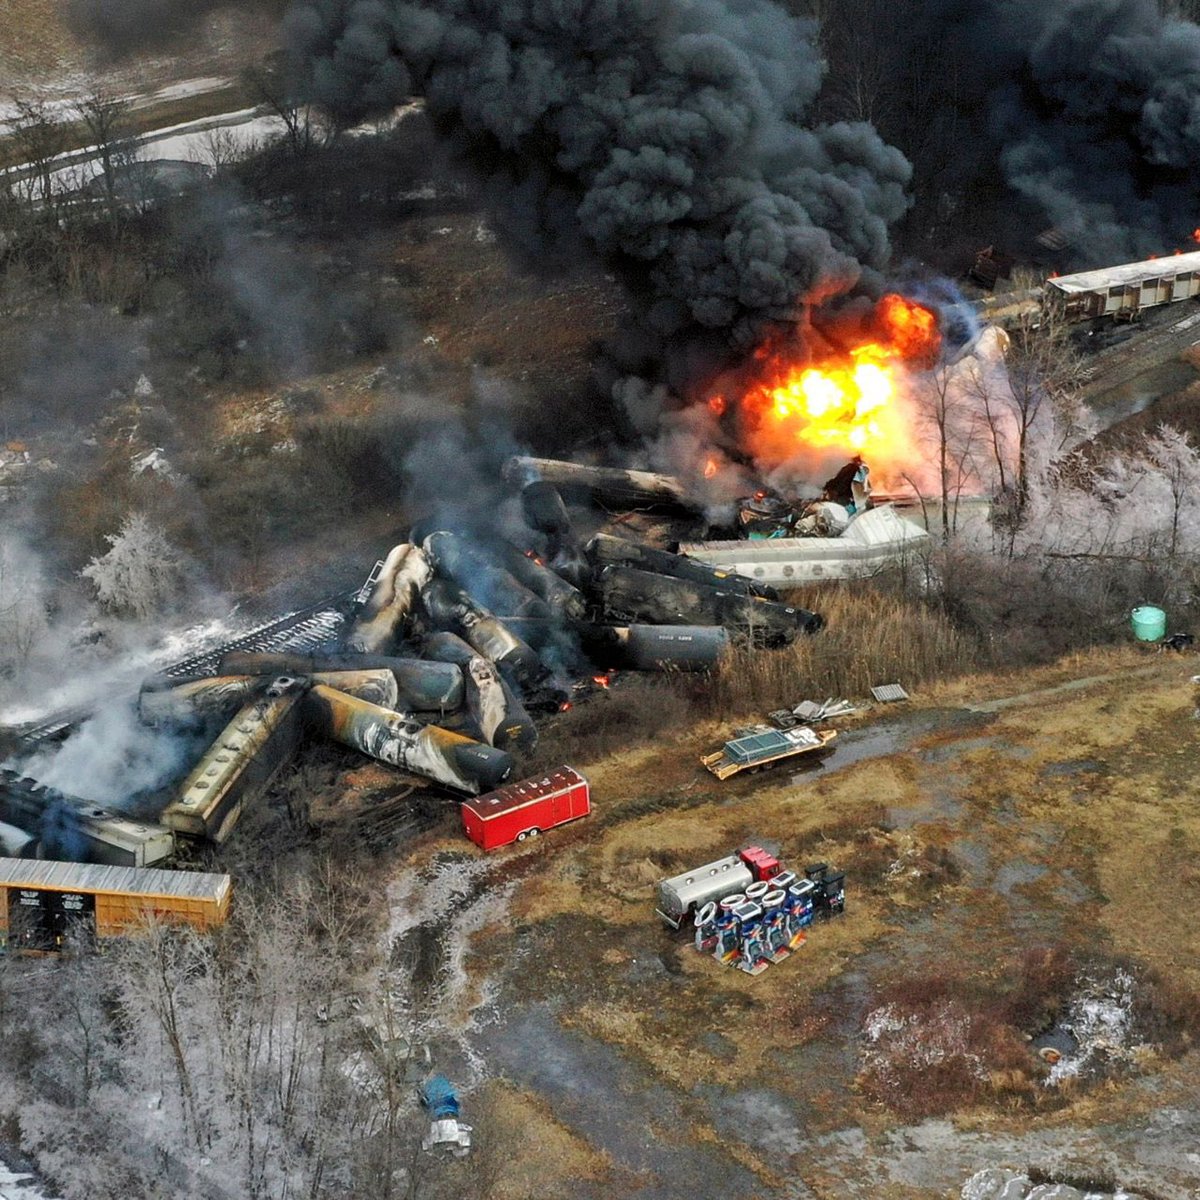 🚨 It’s officially been one year since the government made the decision to blow up a train carrying HIGHLY TOXIC materials in East Palestine, Ohio

It’s been a year FULL of government coverups, lies and ineptitude.

Residents STILL don’t trust their tap water, the air they